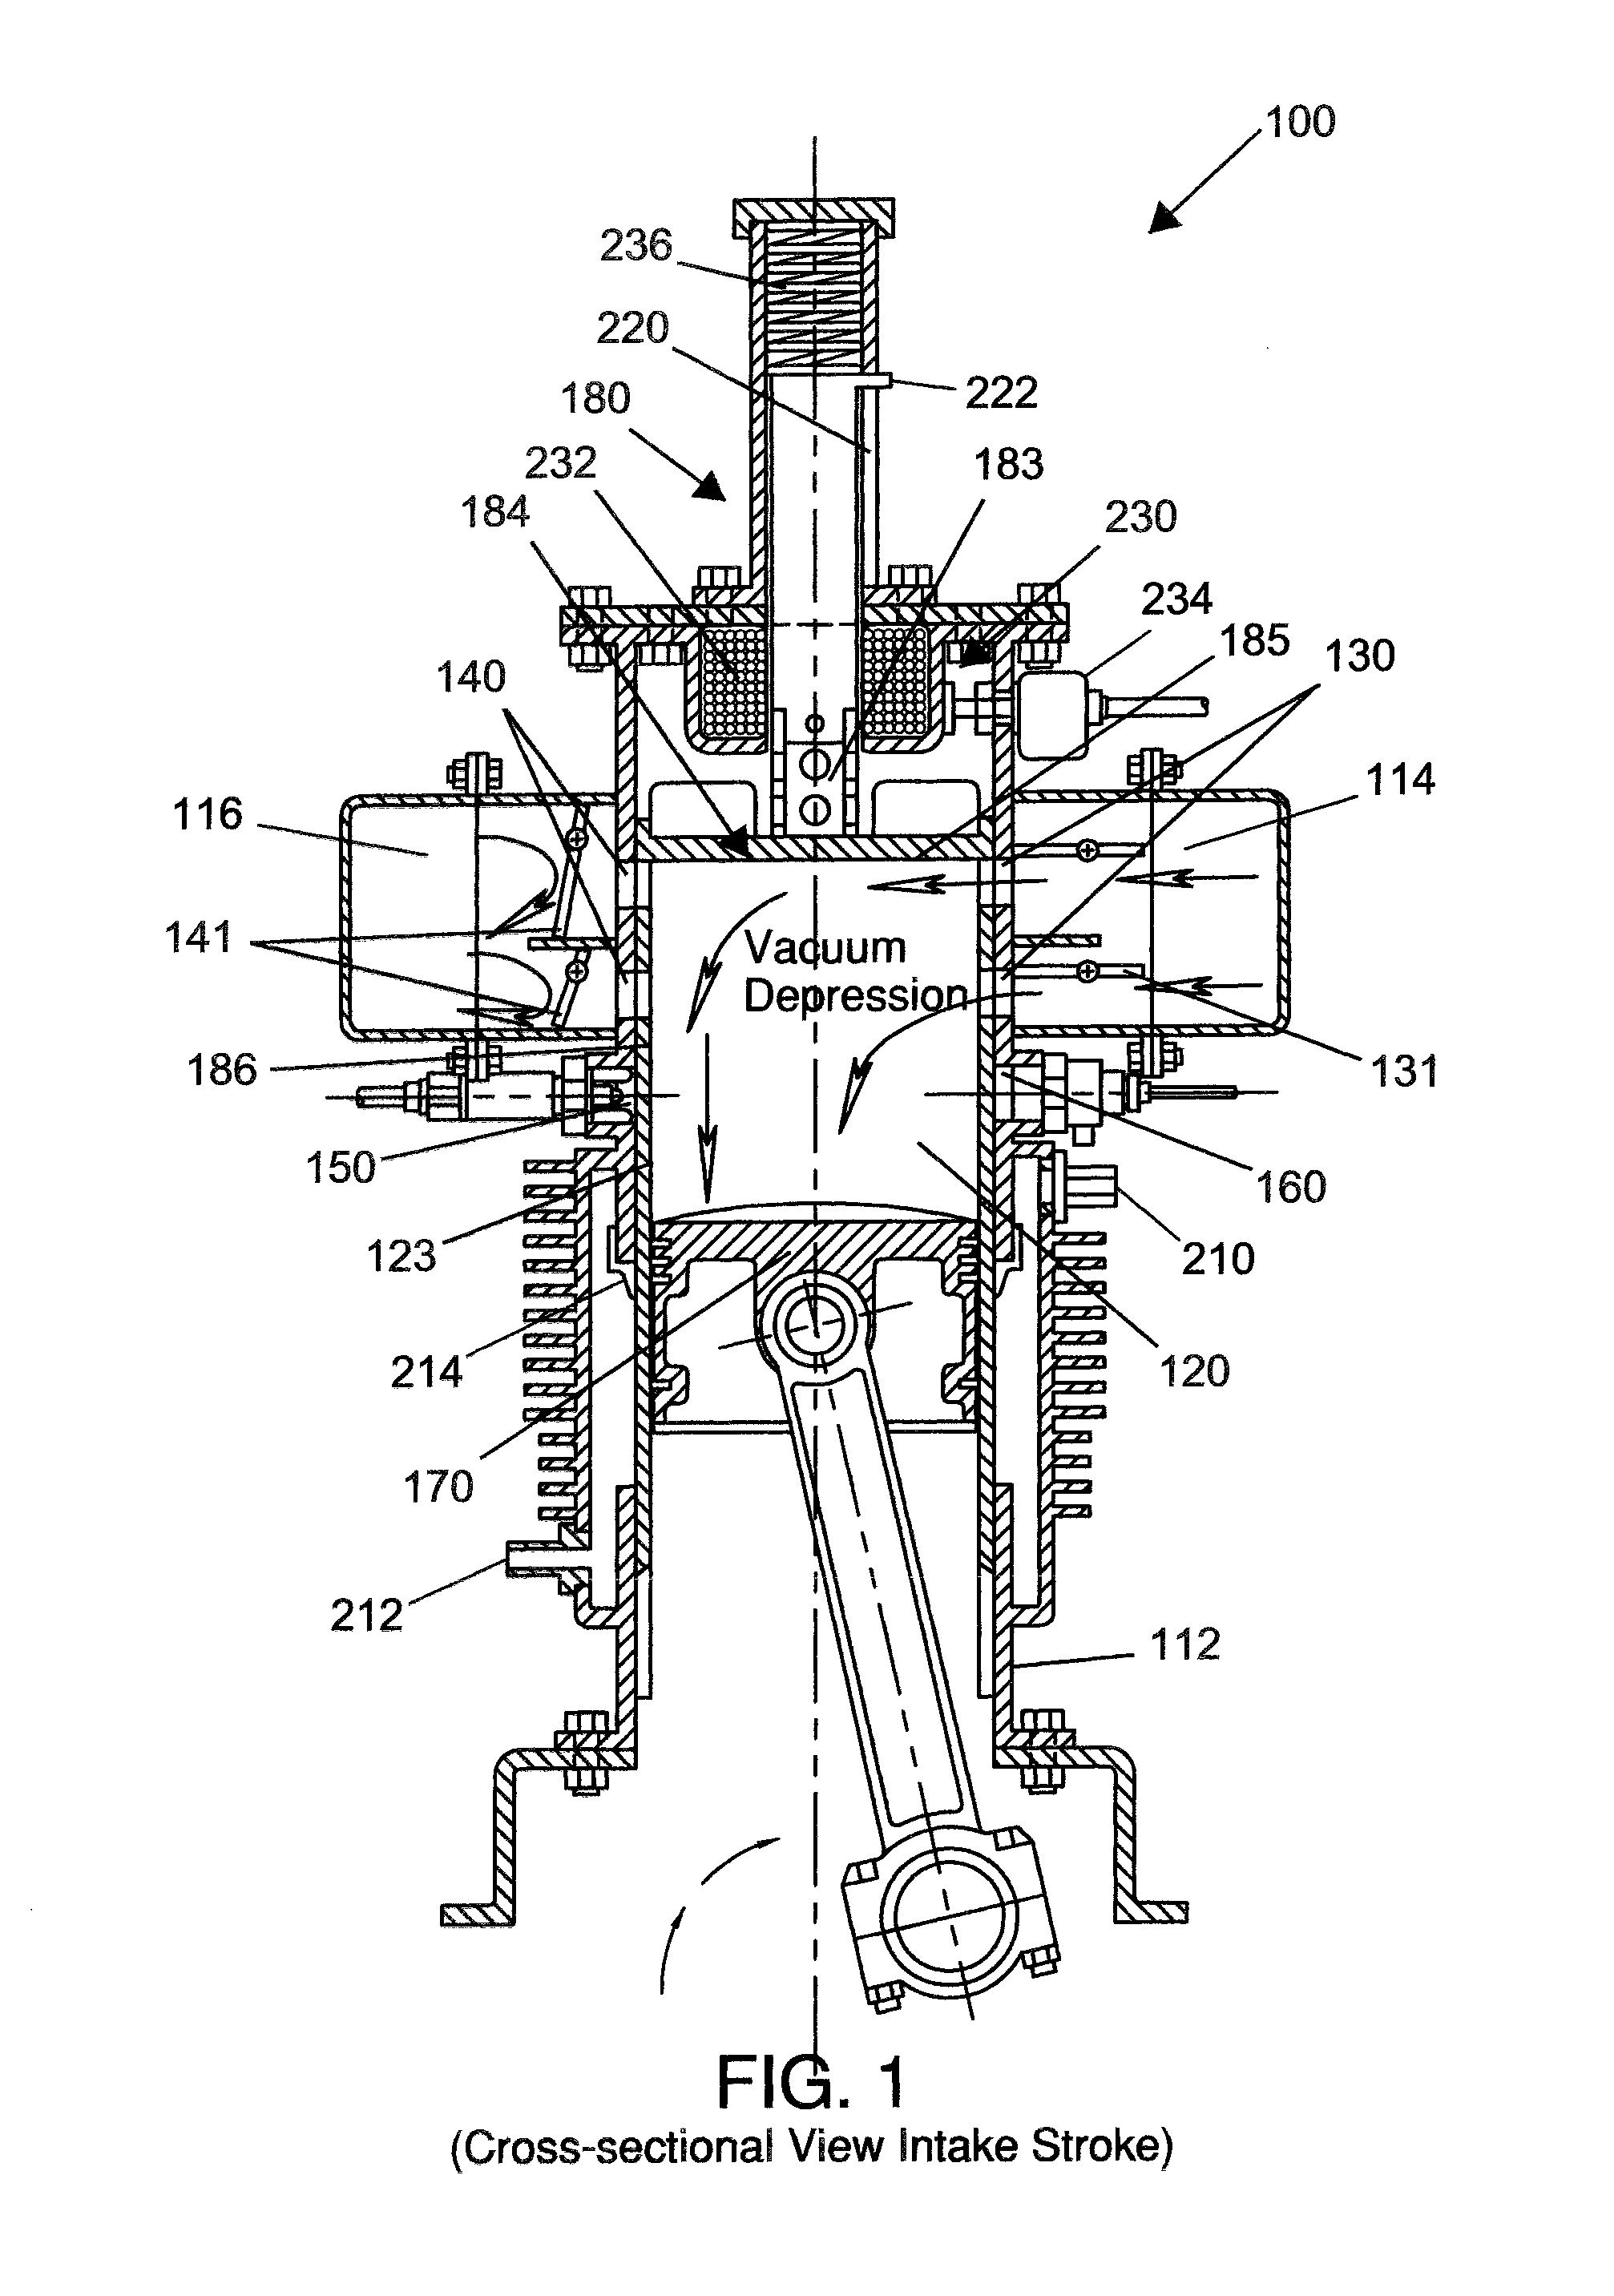 Variable volume combustion chamber system